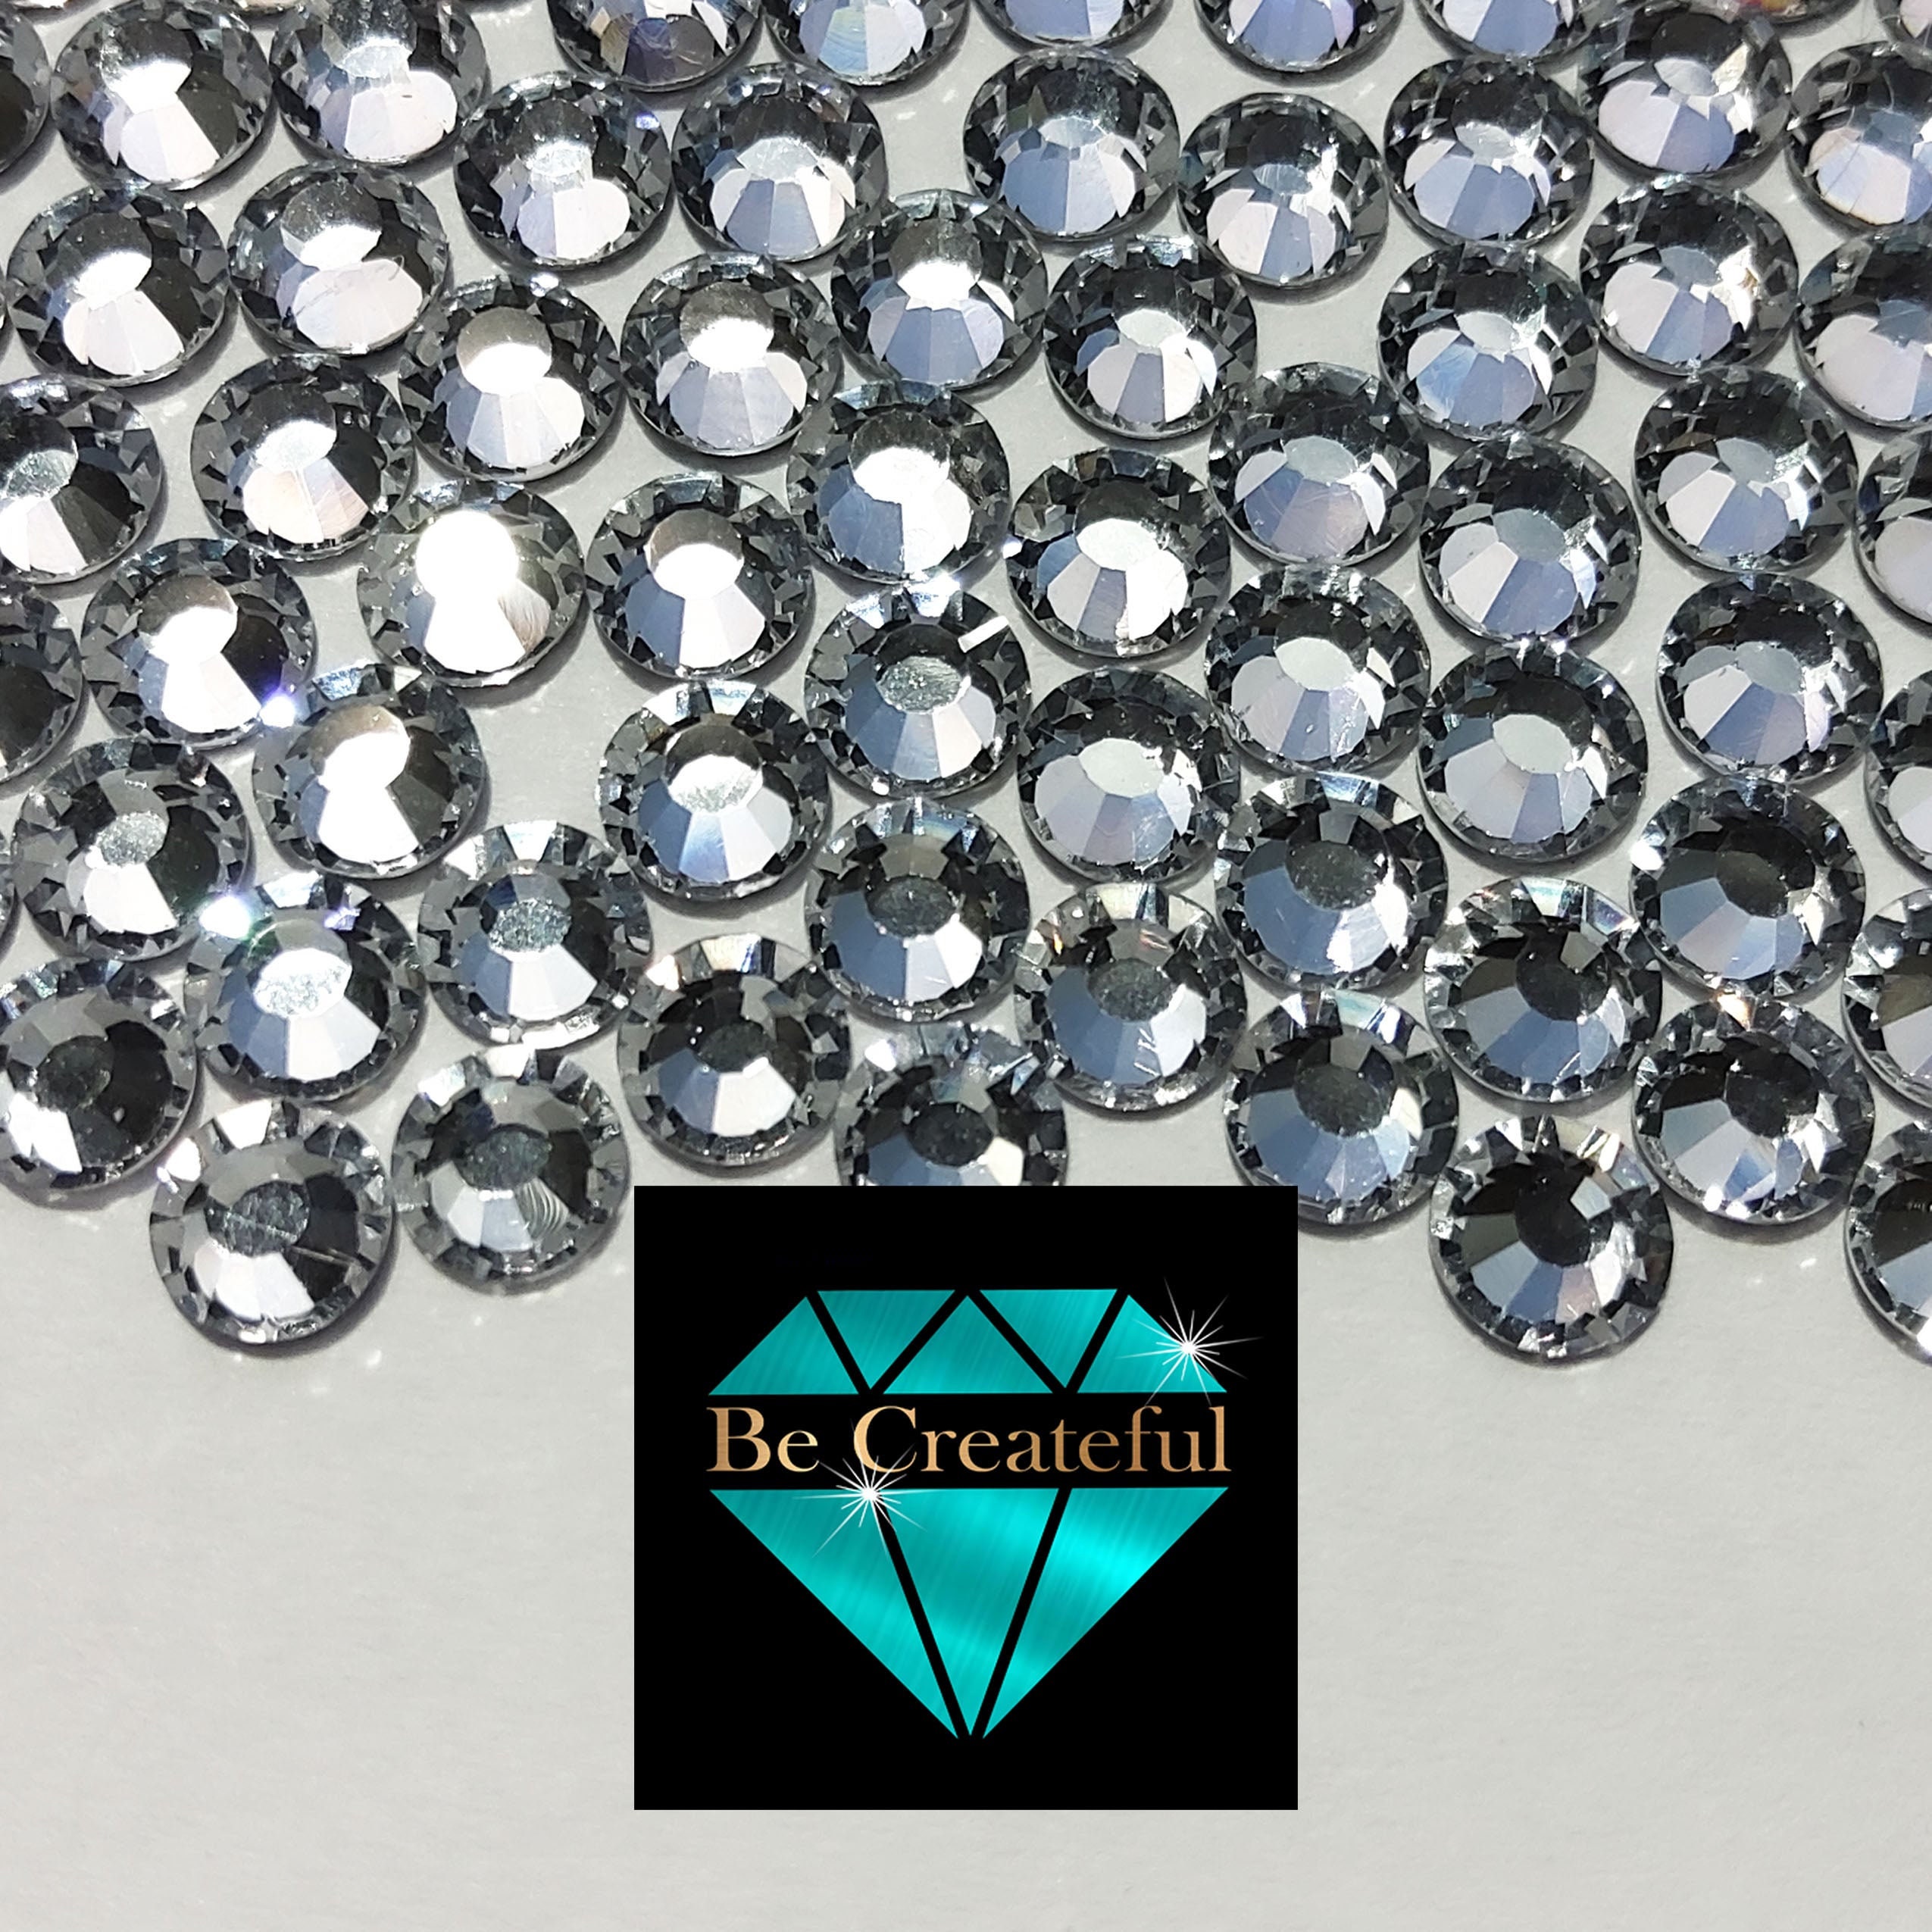 Grey 6ss silver pp hotfix rhinesstone, For Garments, 500 Grams at